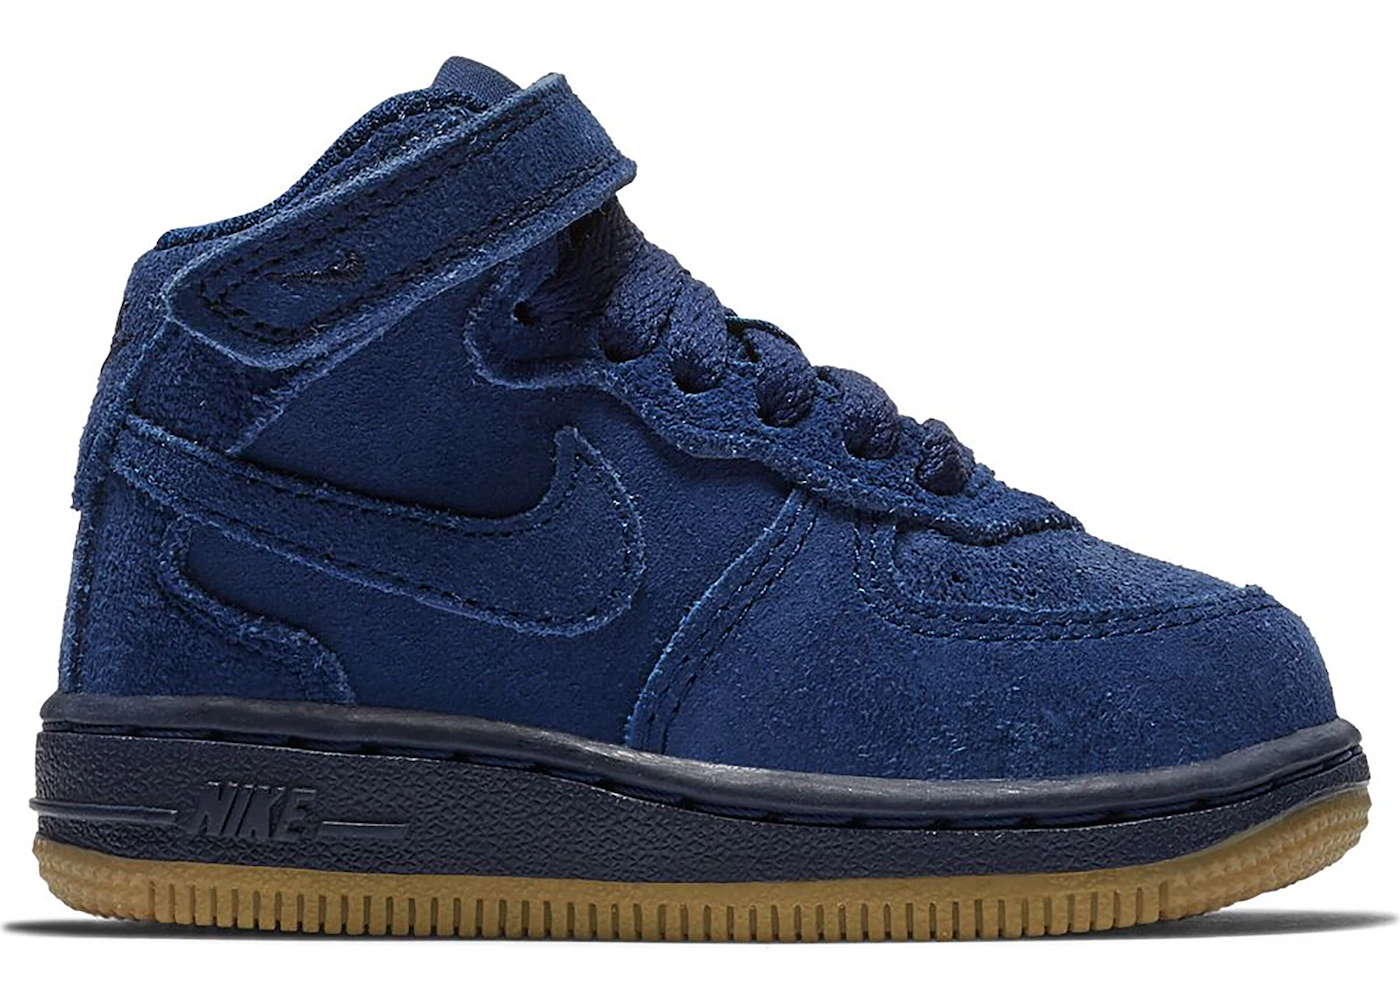 Nike Air Force 1 Mid Blue Void Gum (TD) Toddler - 859338-401 - US